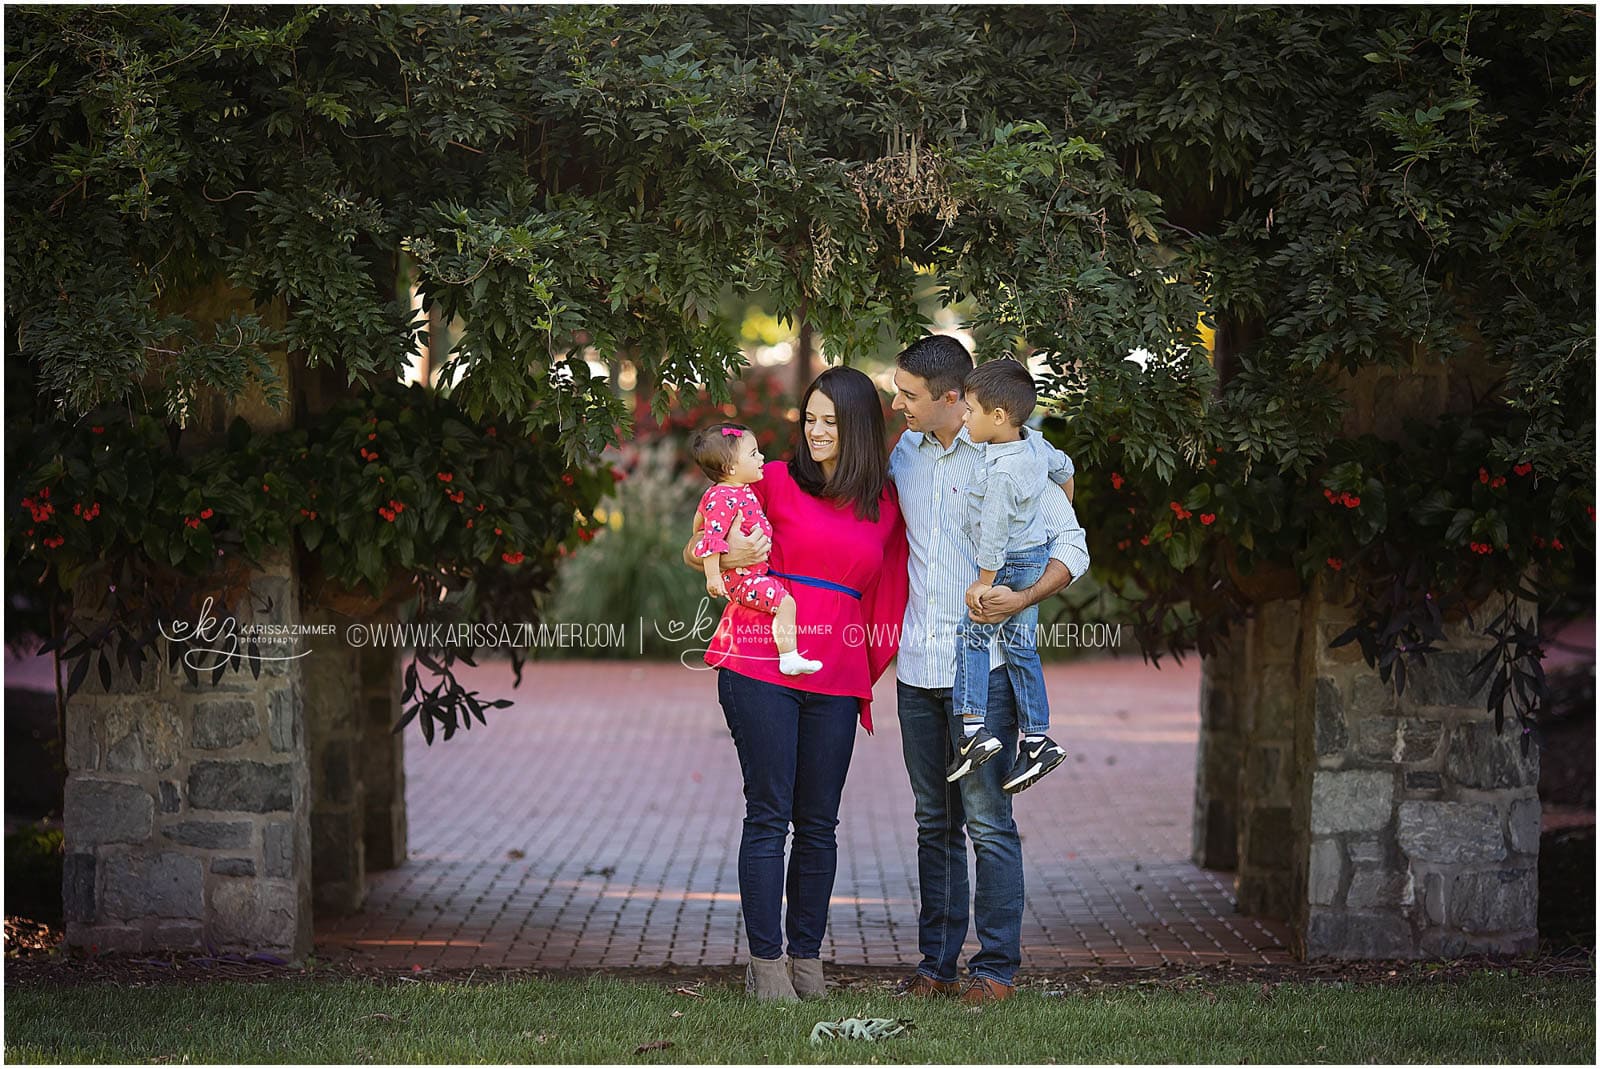 candid family portrait capture by camp hill family photographer, karissa zimmer photography